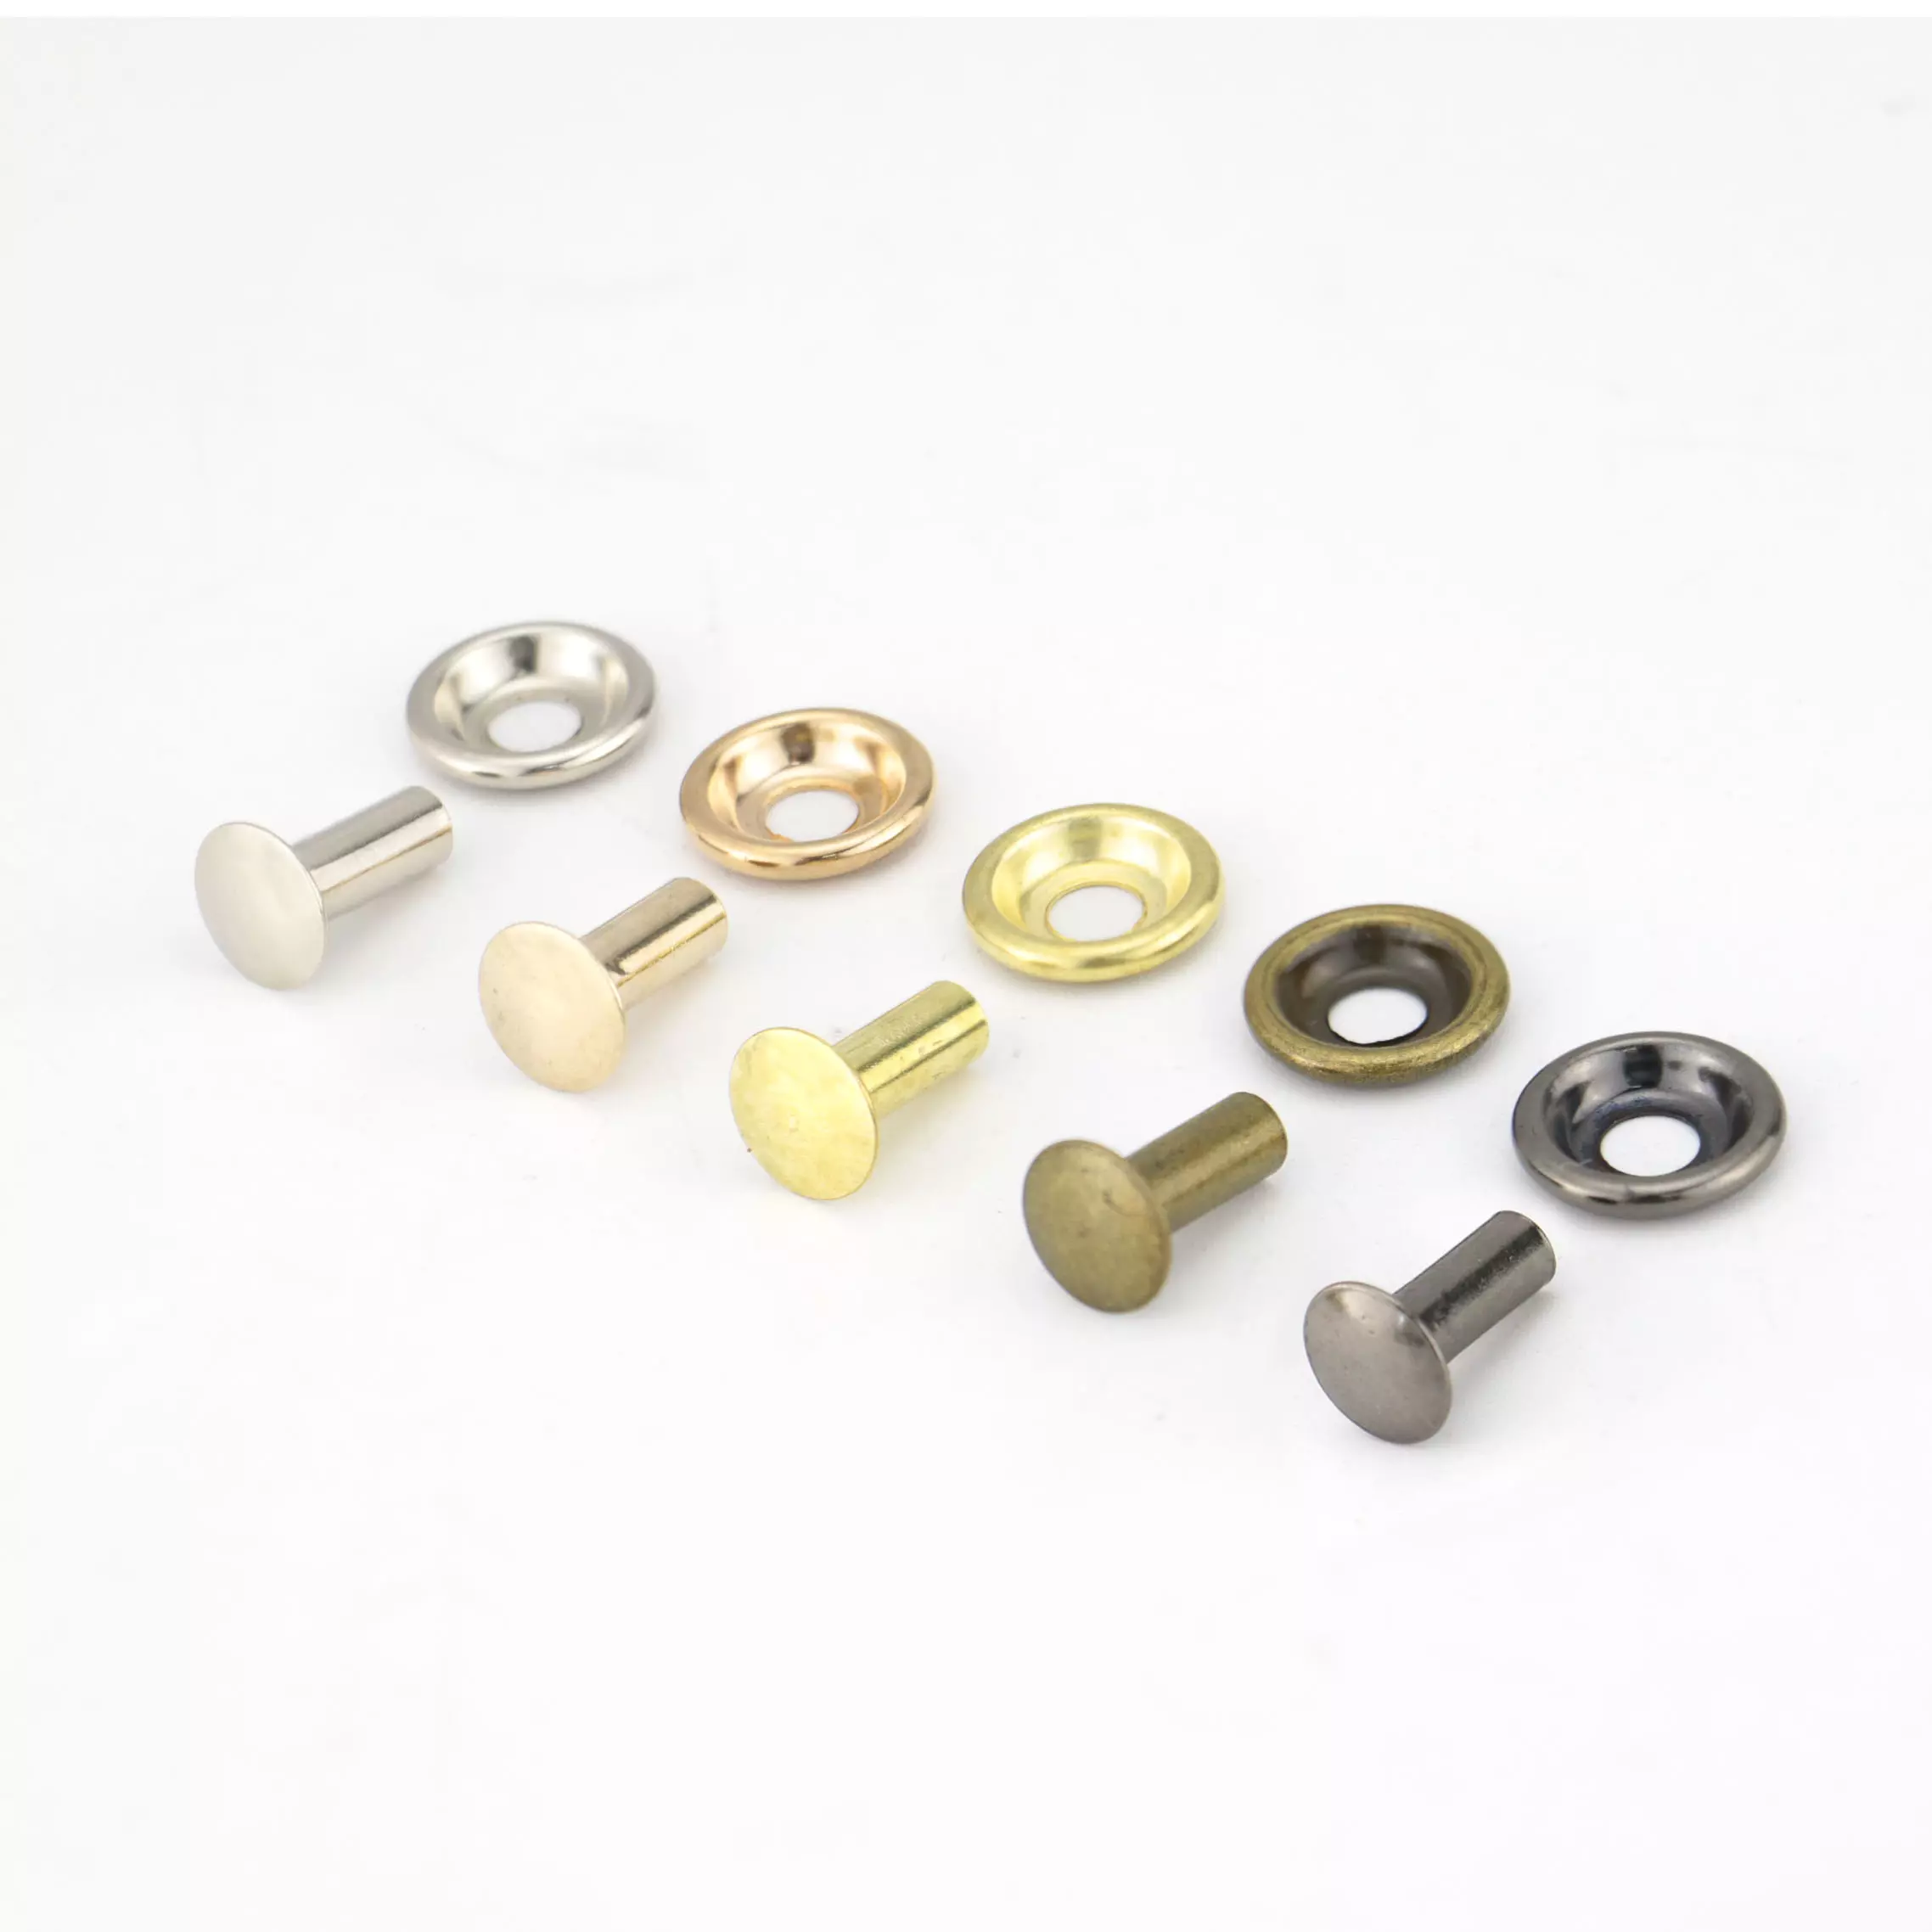 100 Sets Metal Eyelet Grommet Ring Kit for Garment Canvas Sewing  Accessories Bronze 2mm 3mm 4mm 5mm 6mm 8mm 10mm 12mm 14mm 17mm